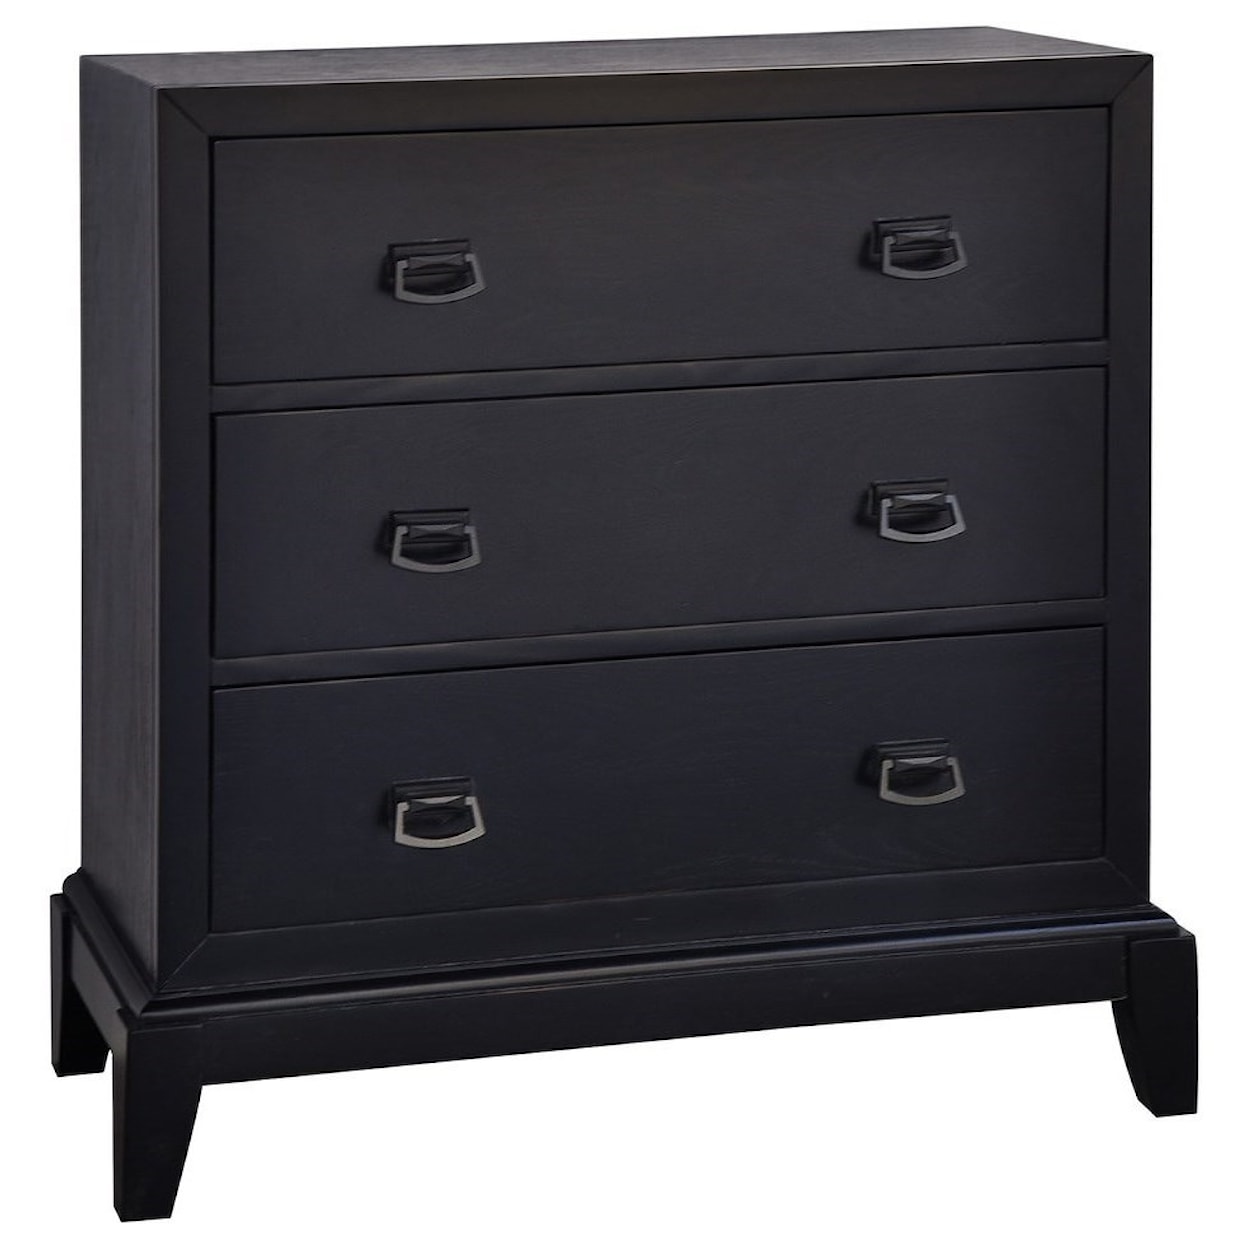 Crestview Collection Accent Furniture Broadway Black 3 Drawer Chest